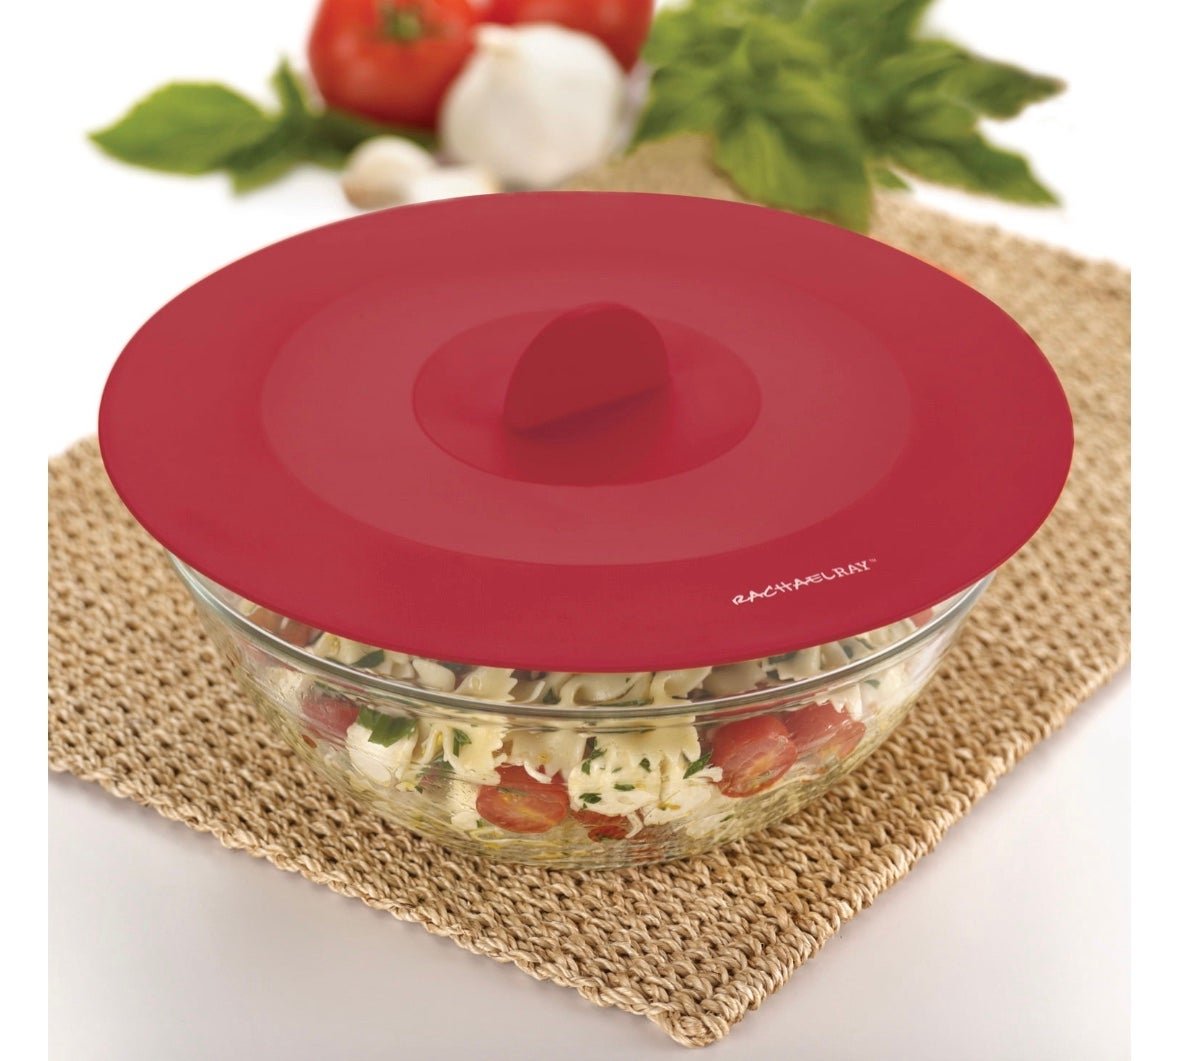 Set of 3 Rachael Ray Red Silicone Suction Lid Bowl Lid Pot Lid hpllJGWJZ